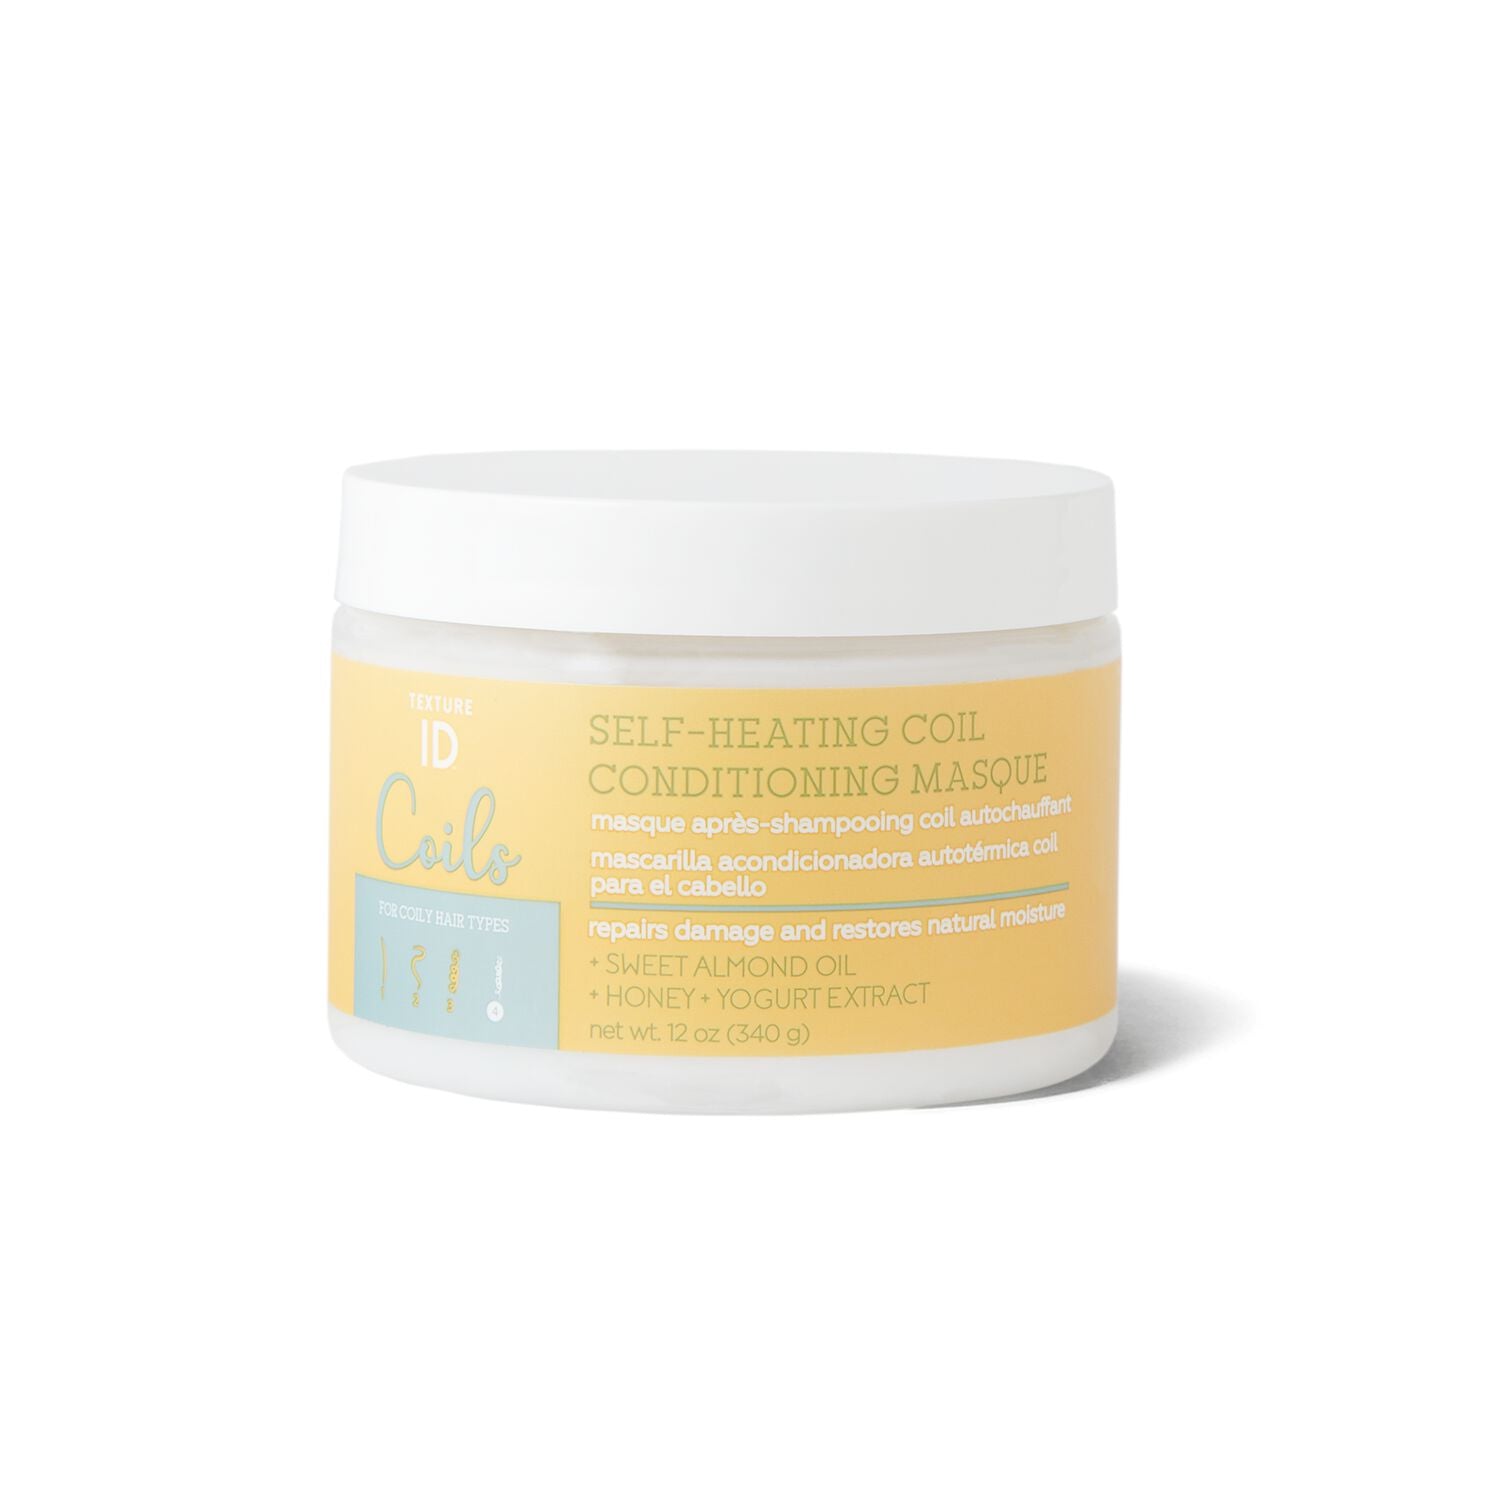 Coils  by   Texture ID Self-Heating Coil Conditioning Masque